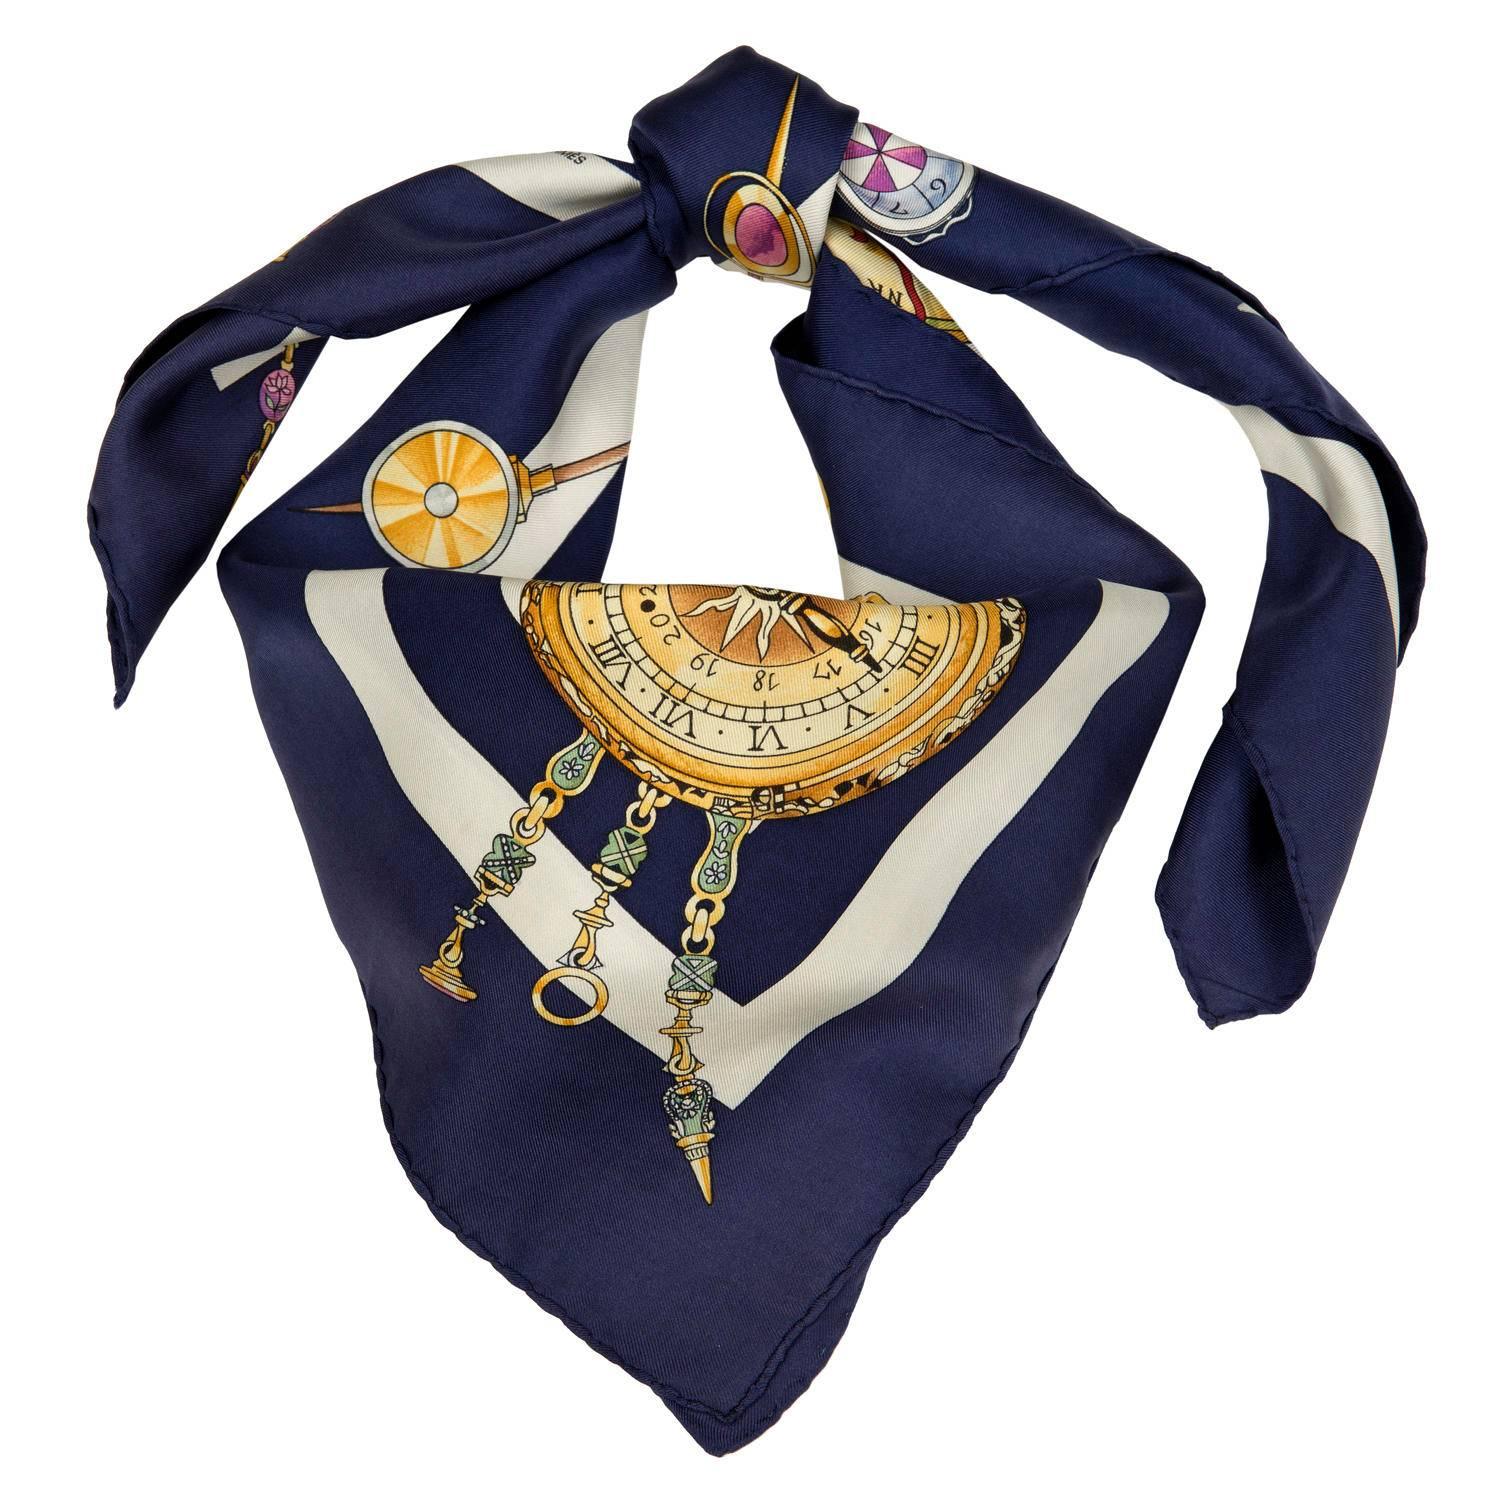 'La Ronde des Heures' - a classic Hermes Silk Scarf designed by Loic Dubigeon in 2000. This Rare Hermes 'Millennium'  celebration scarf finished in sumptuous colours with a Navy Blue Border and Gold & Grey Ground. A real Heritage piece!